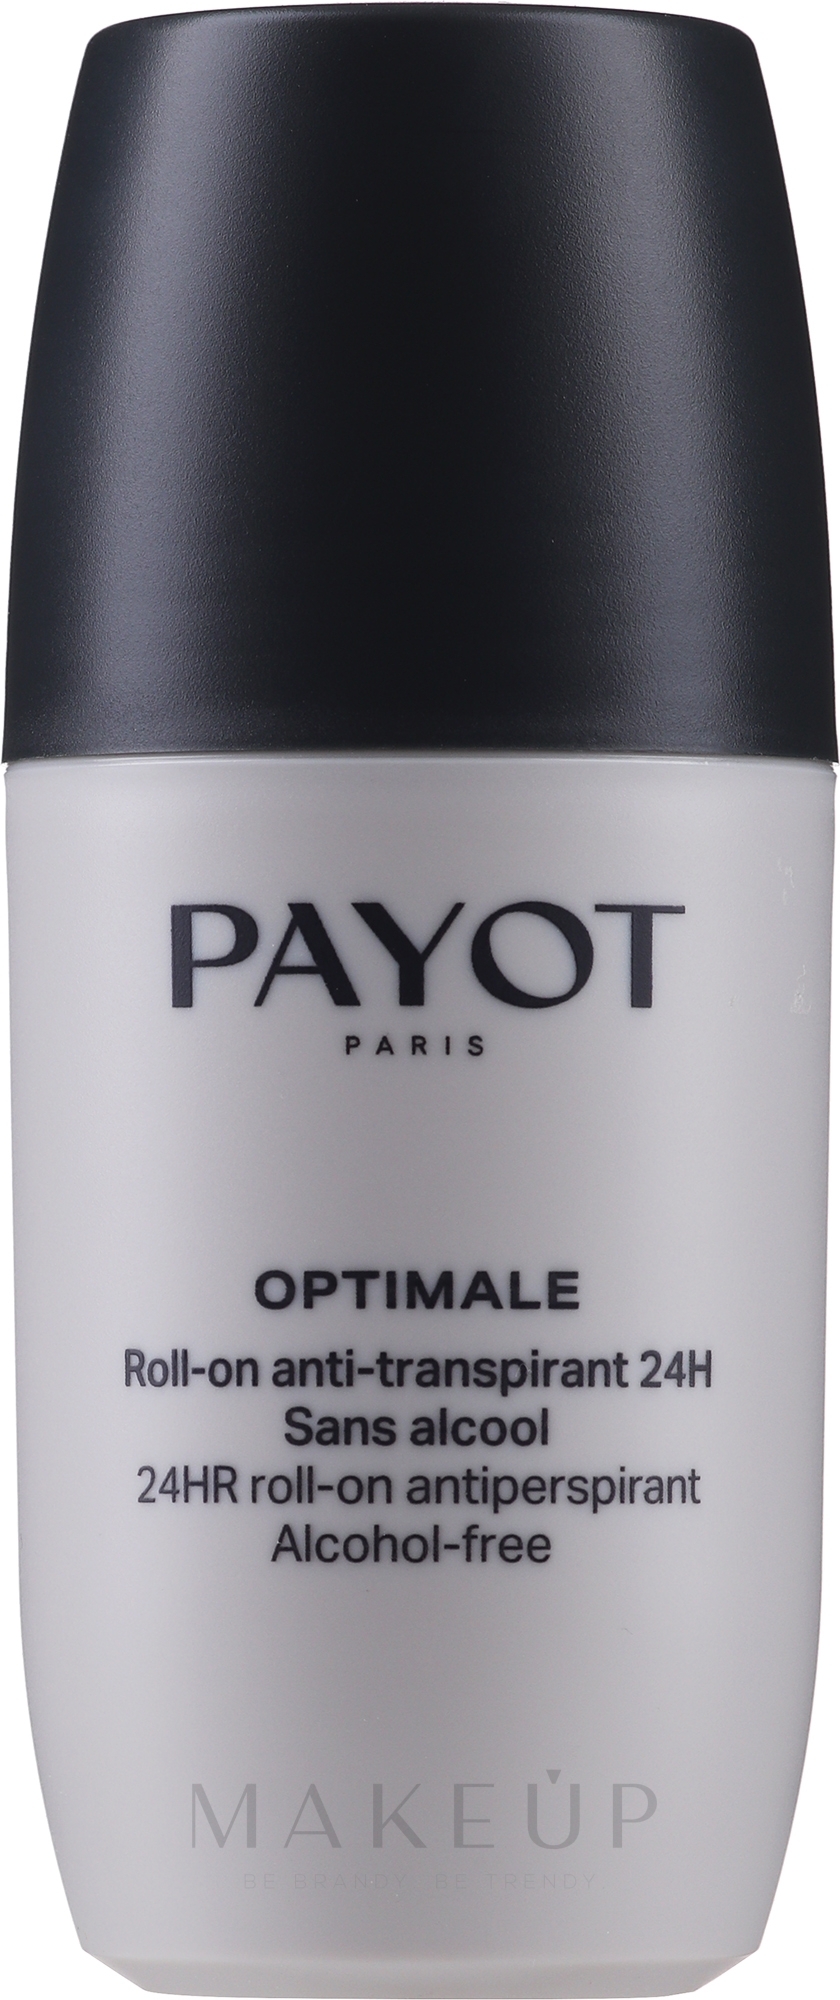 Deo Roll-on Antitranspirant - Payot Optimale Homme Deodorant 24 Heures — Foto 75 ml